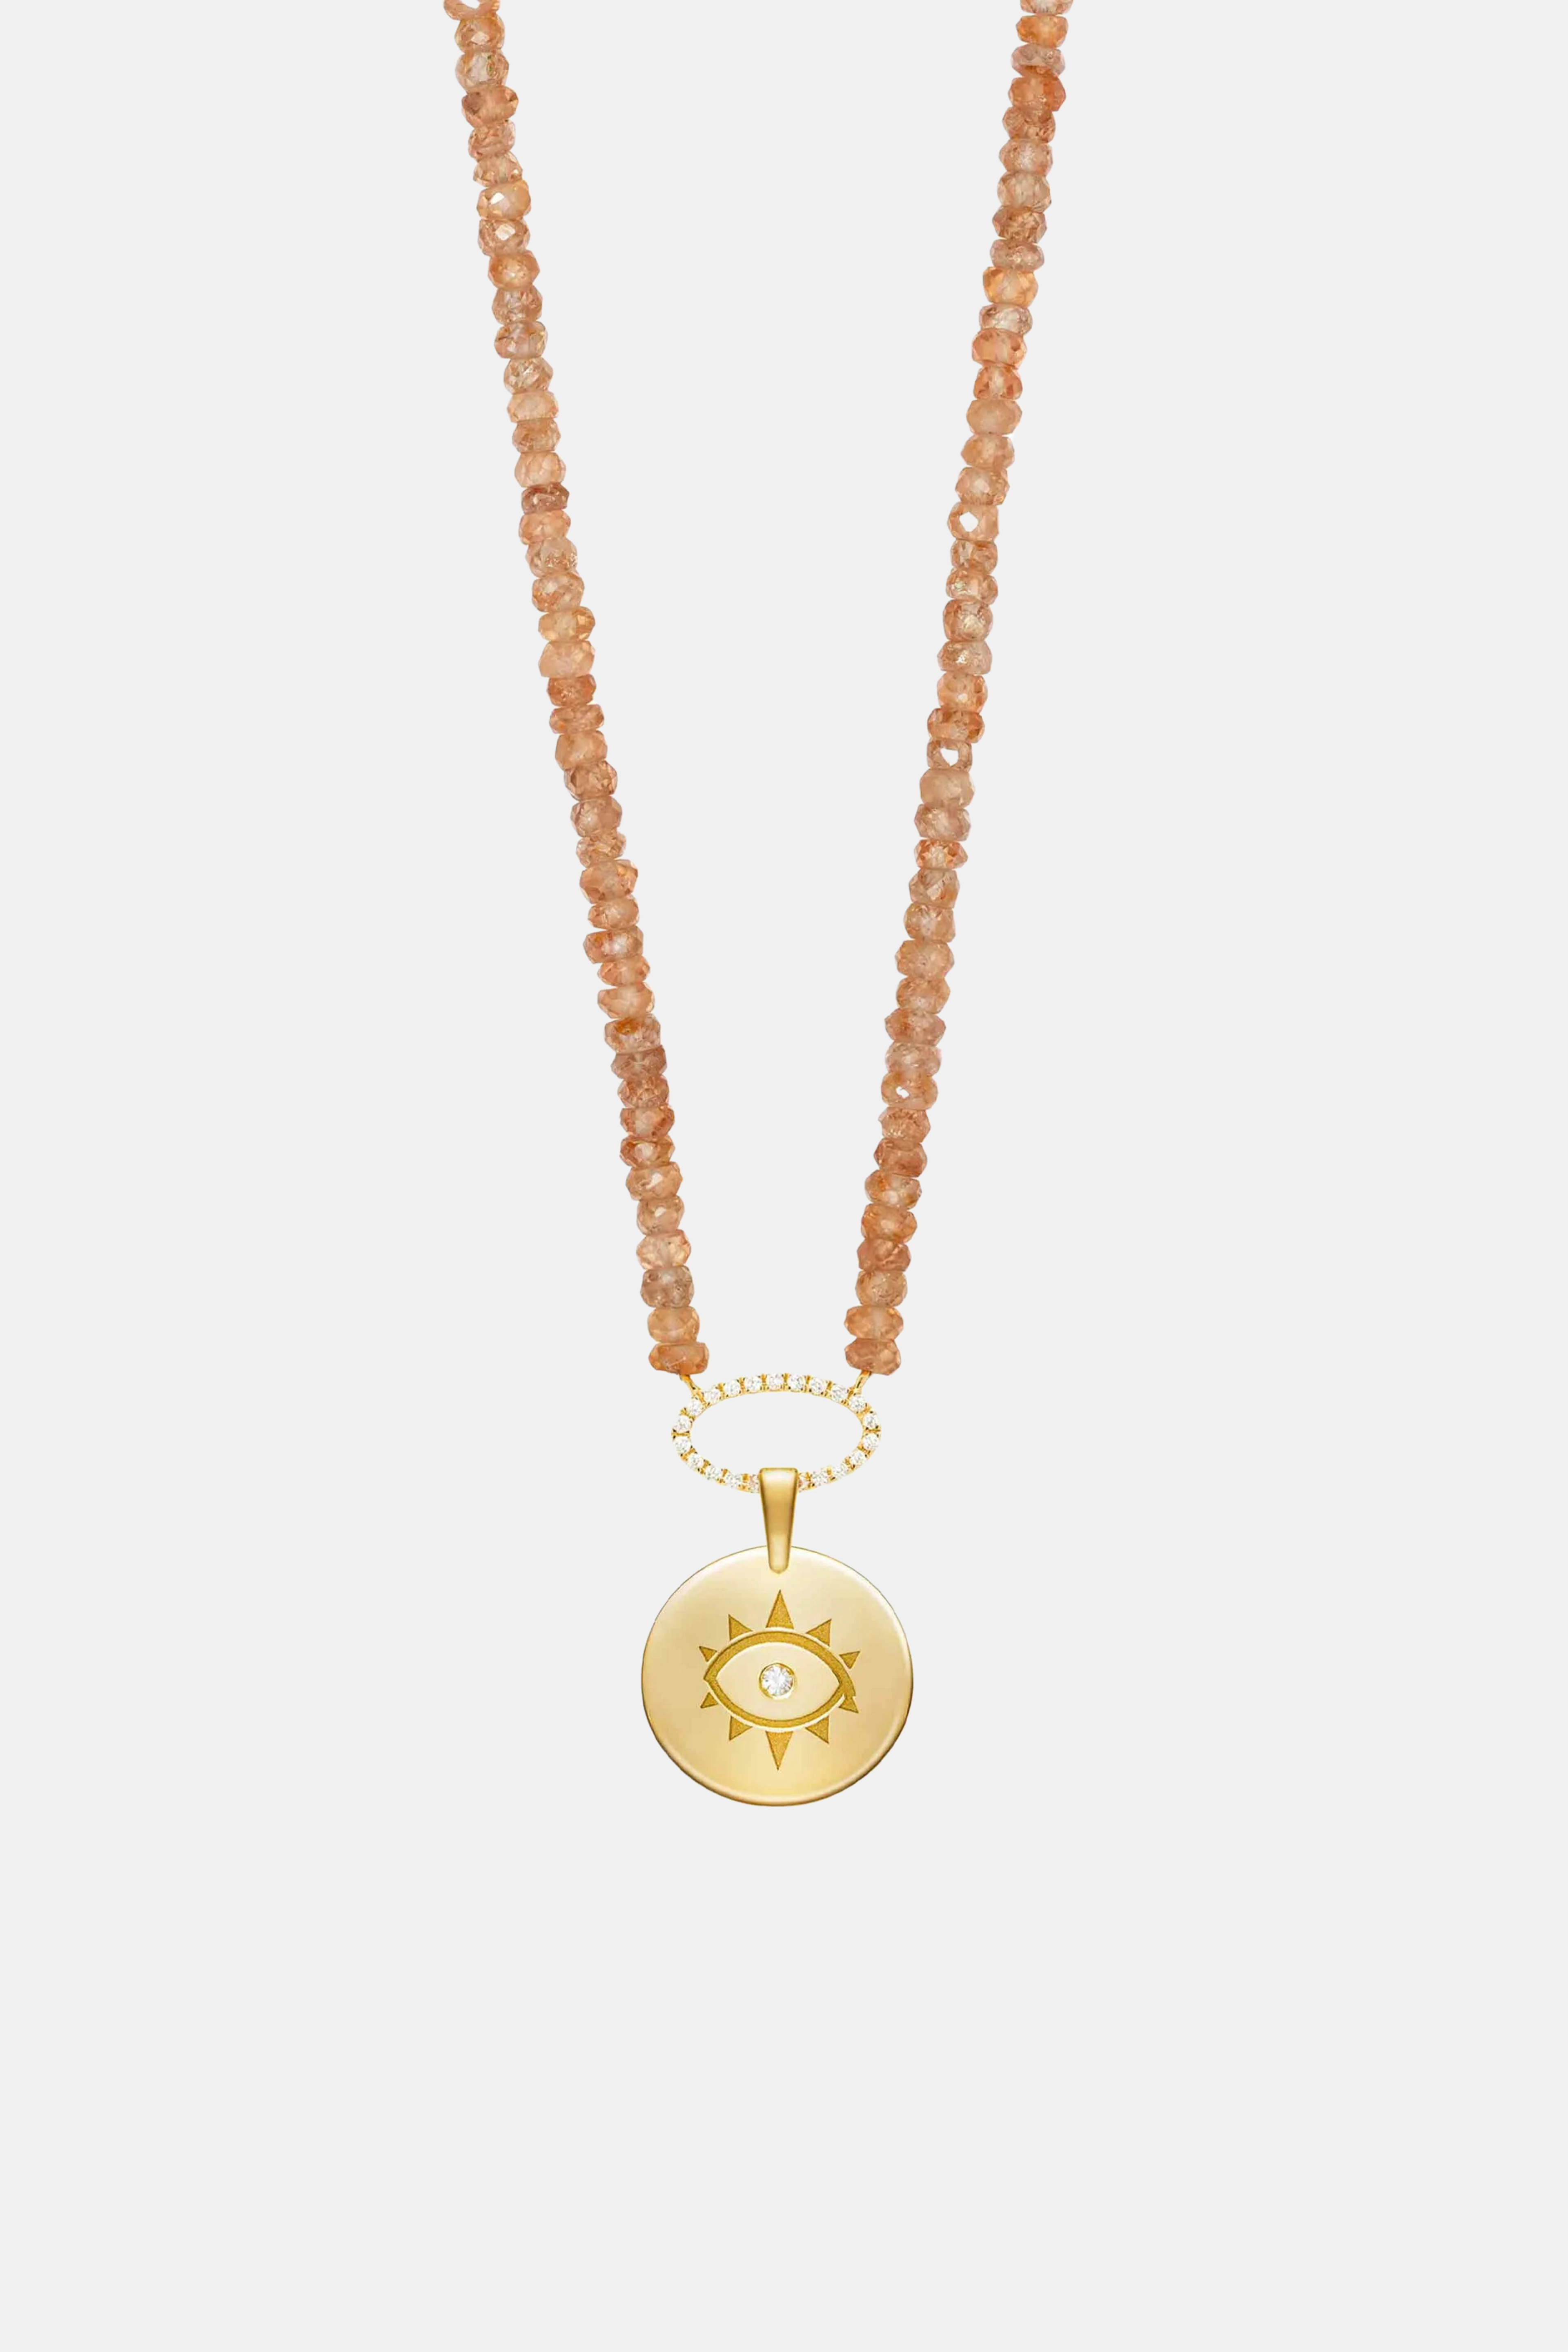 Zircon Apricot Beaded Necklace With Coin Evil Eye Pendant